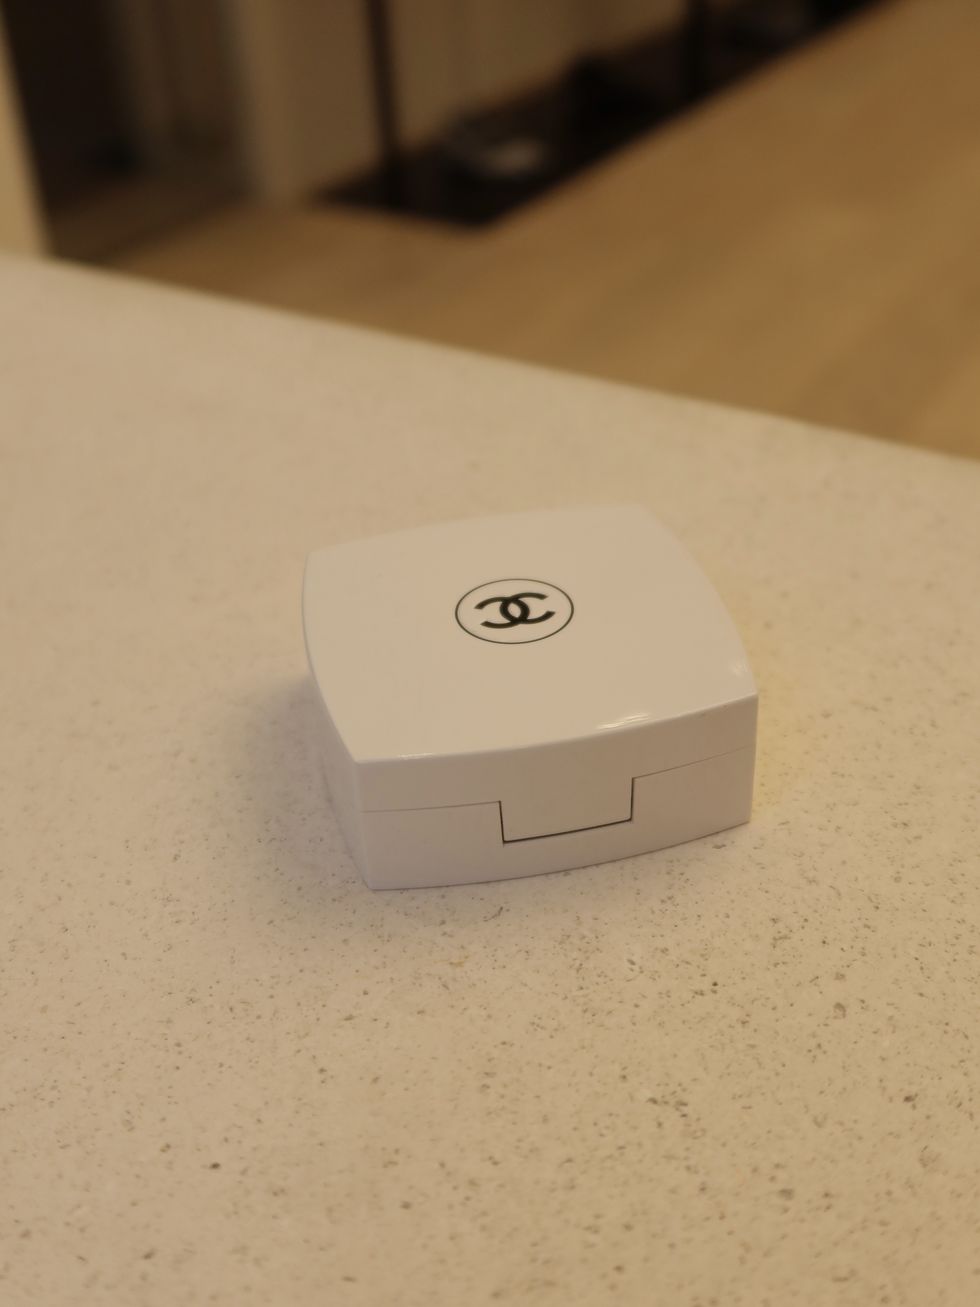 a white square object with a logo on it